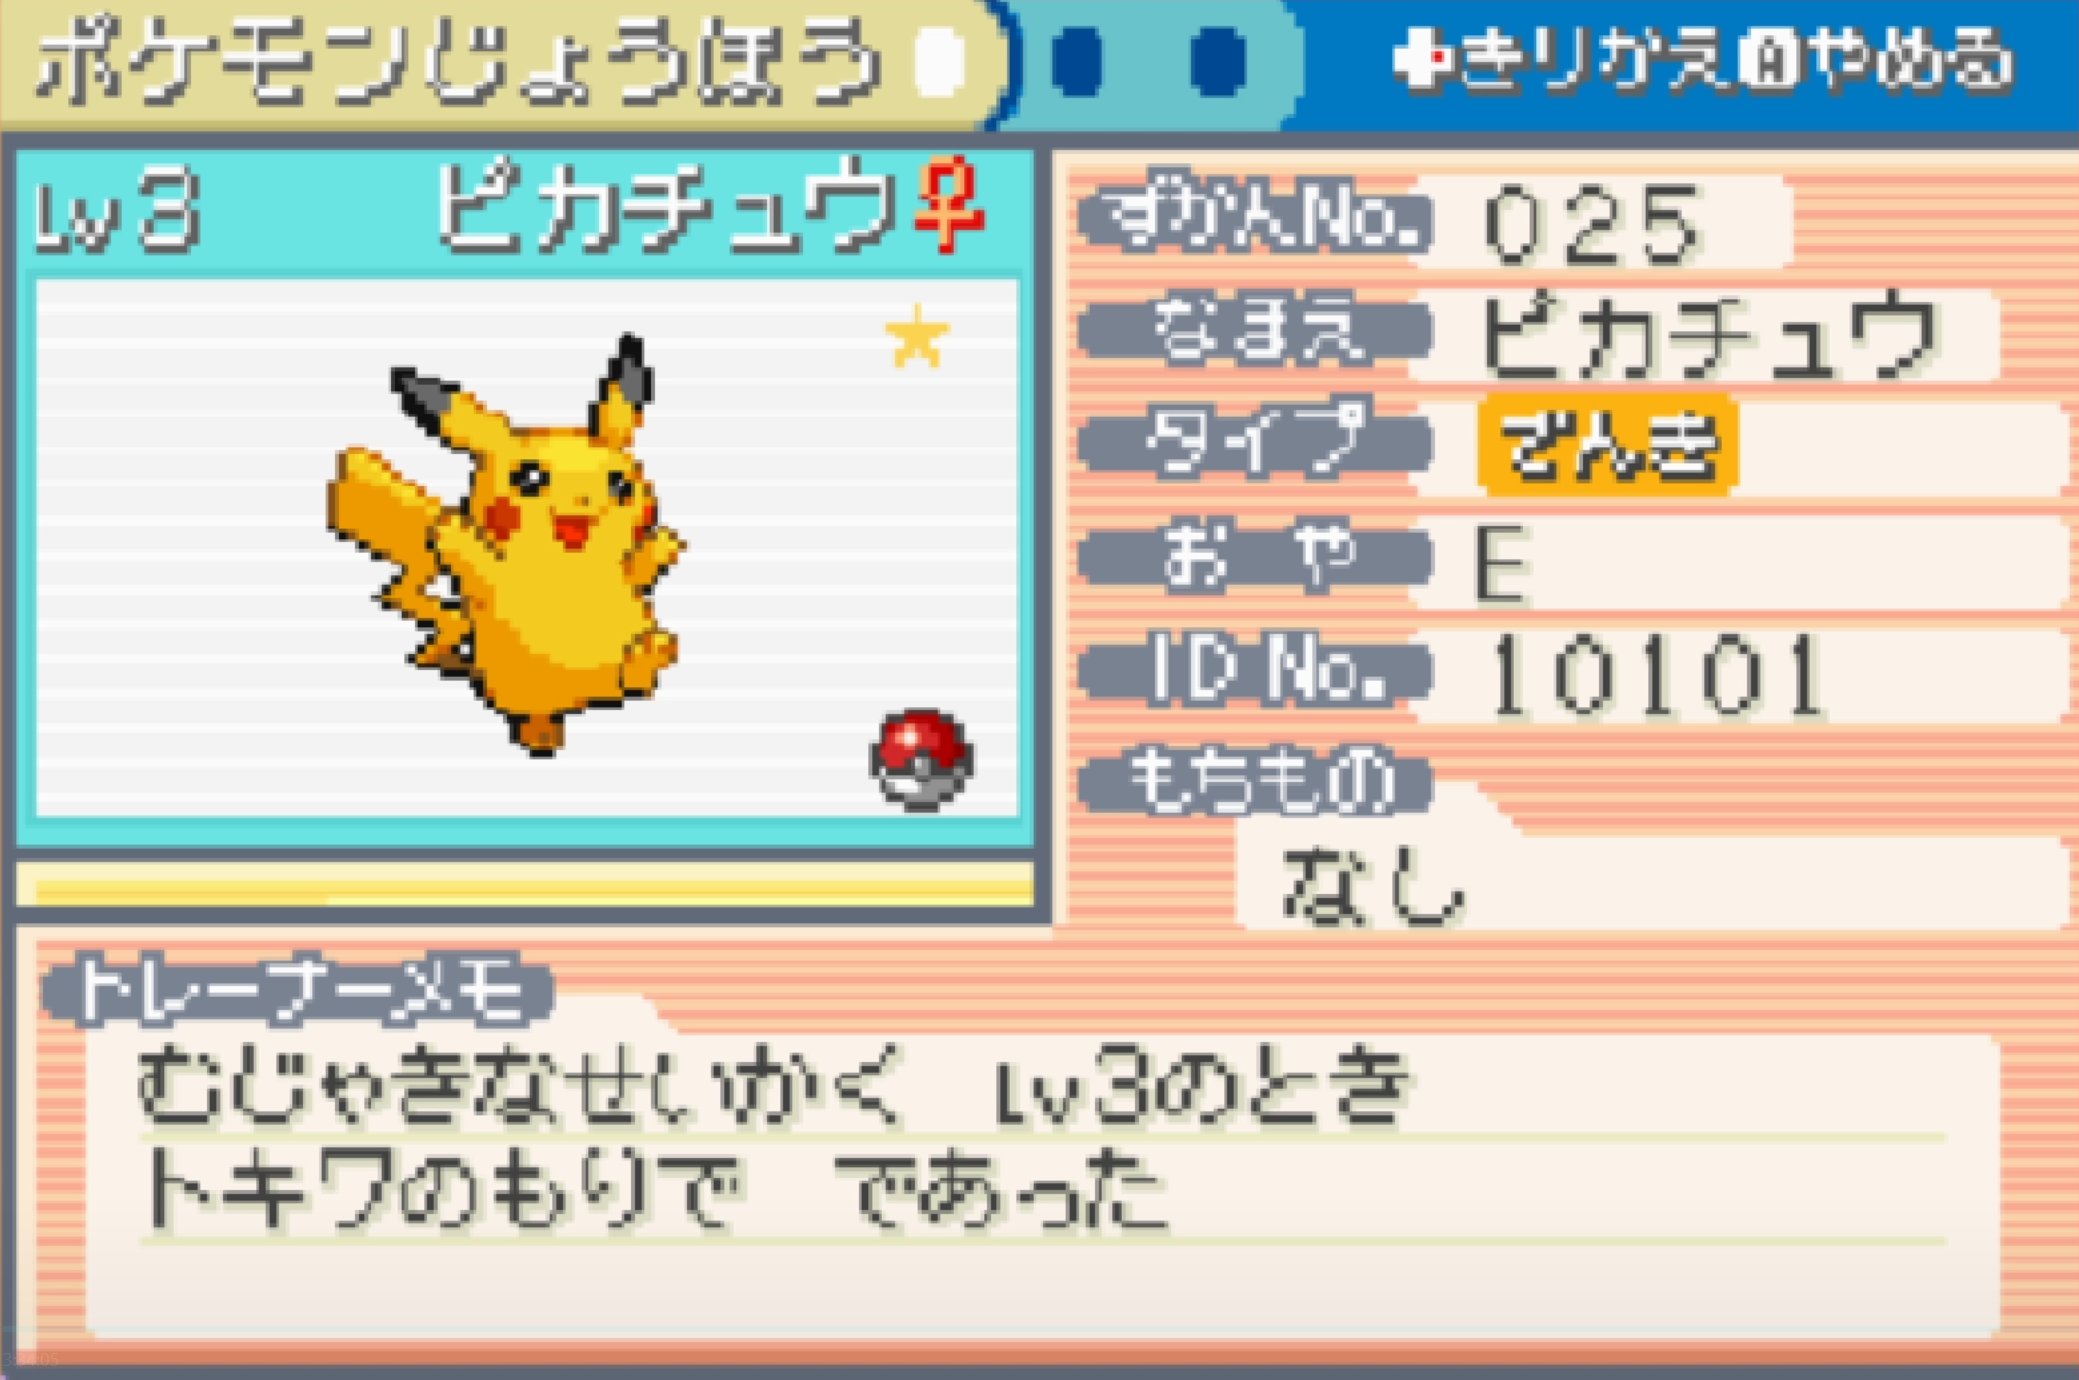 LIVE] Shiny 5% Pikachu after a total of 213,162 REs and 20 Phases